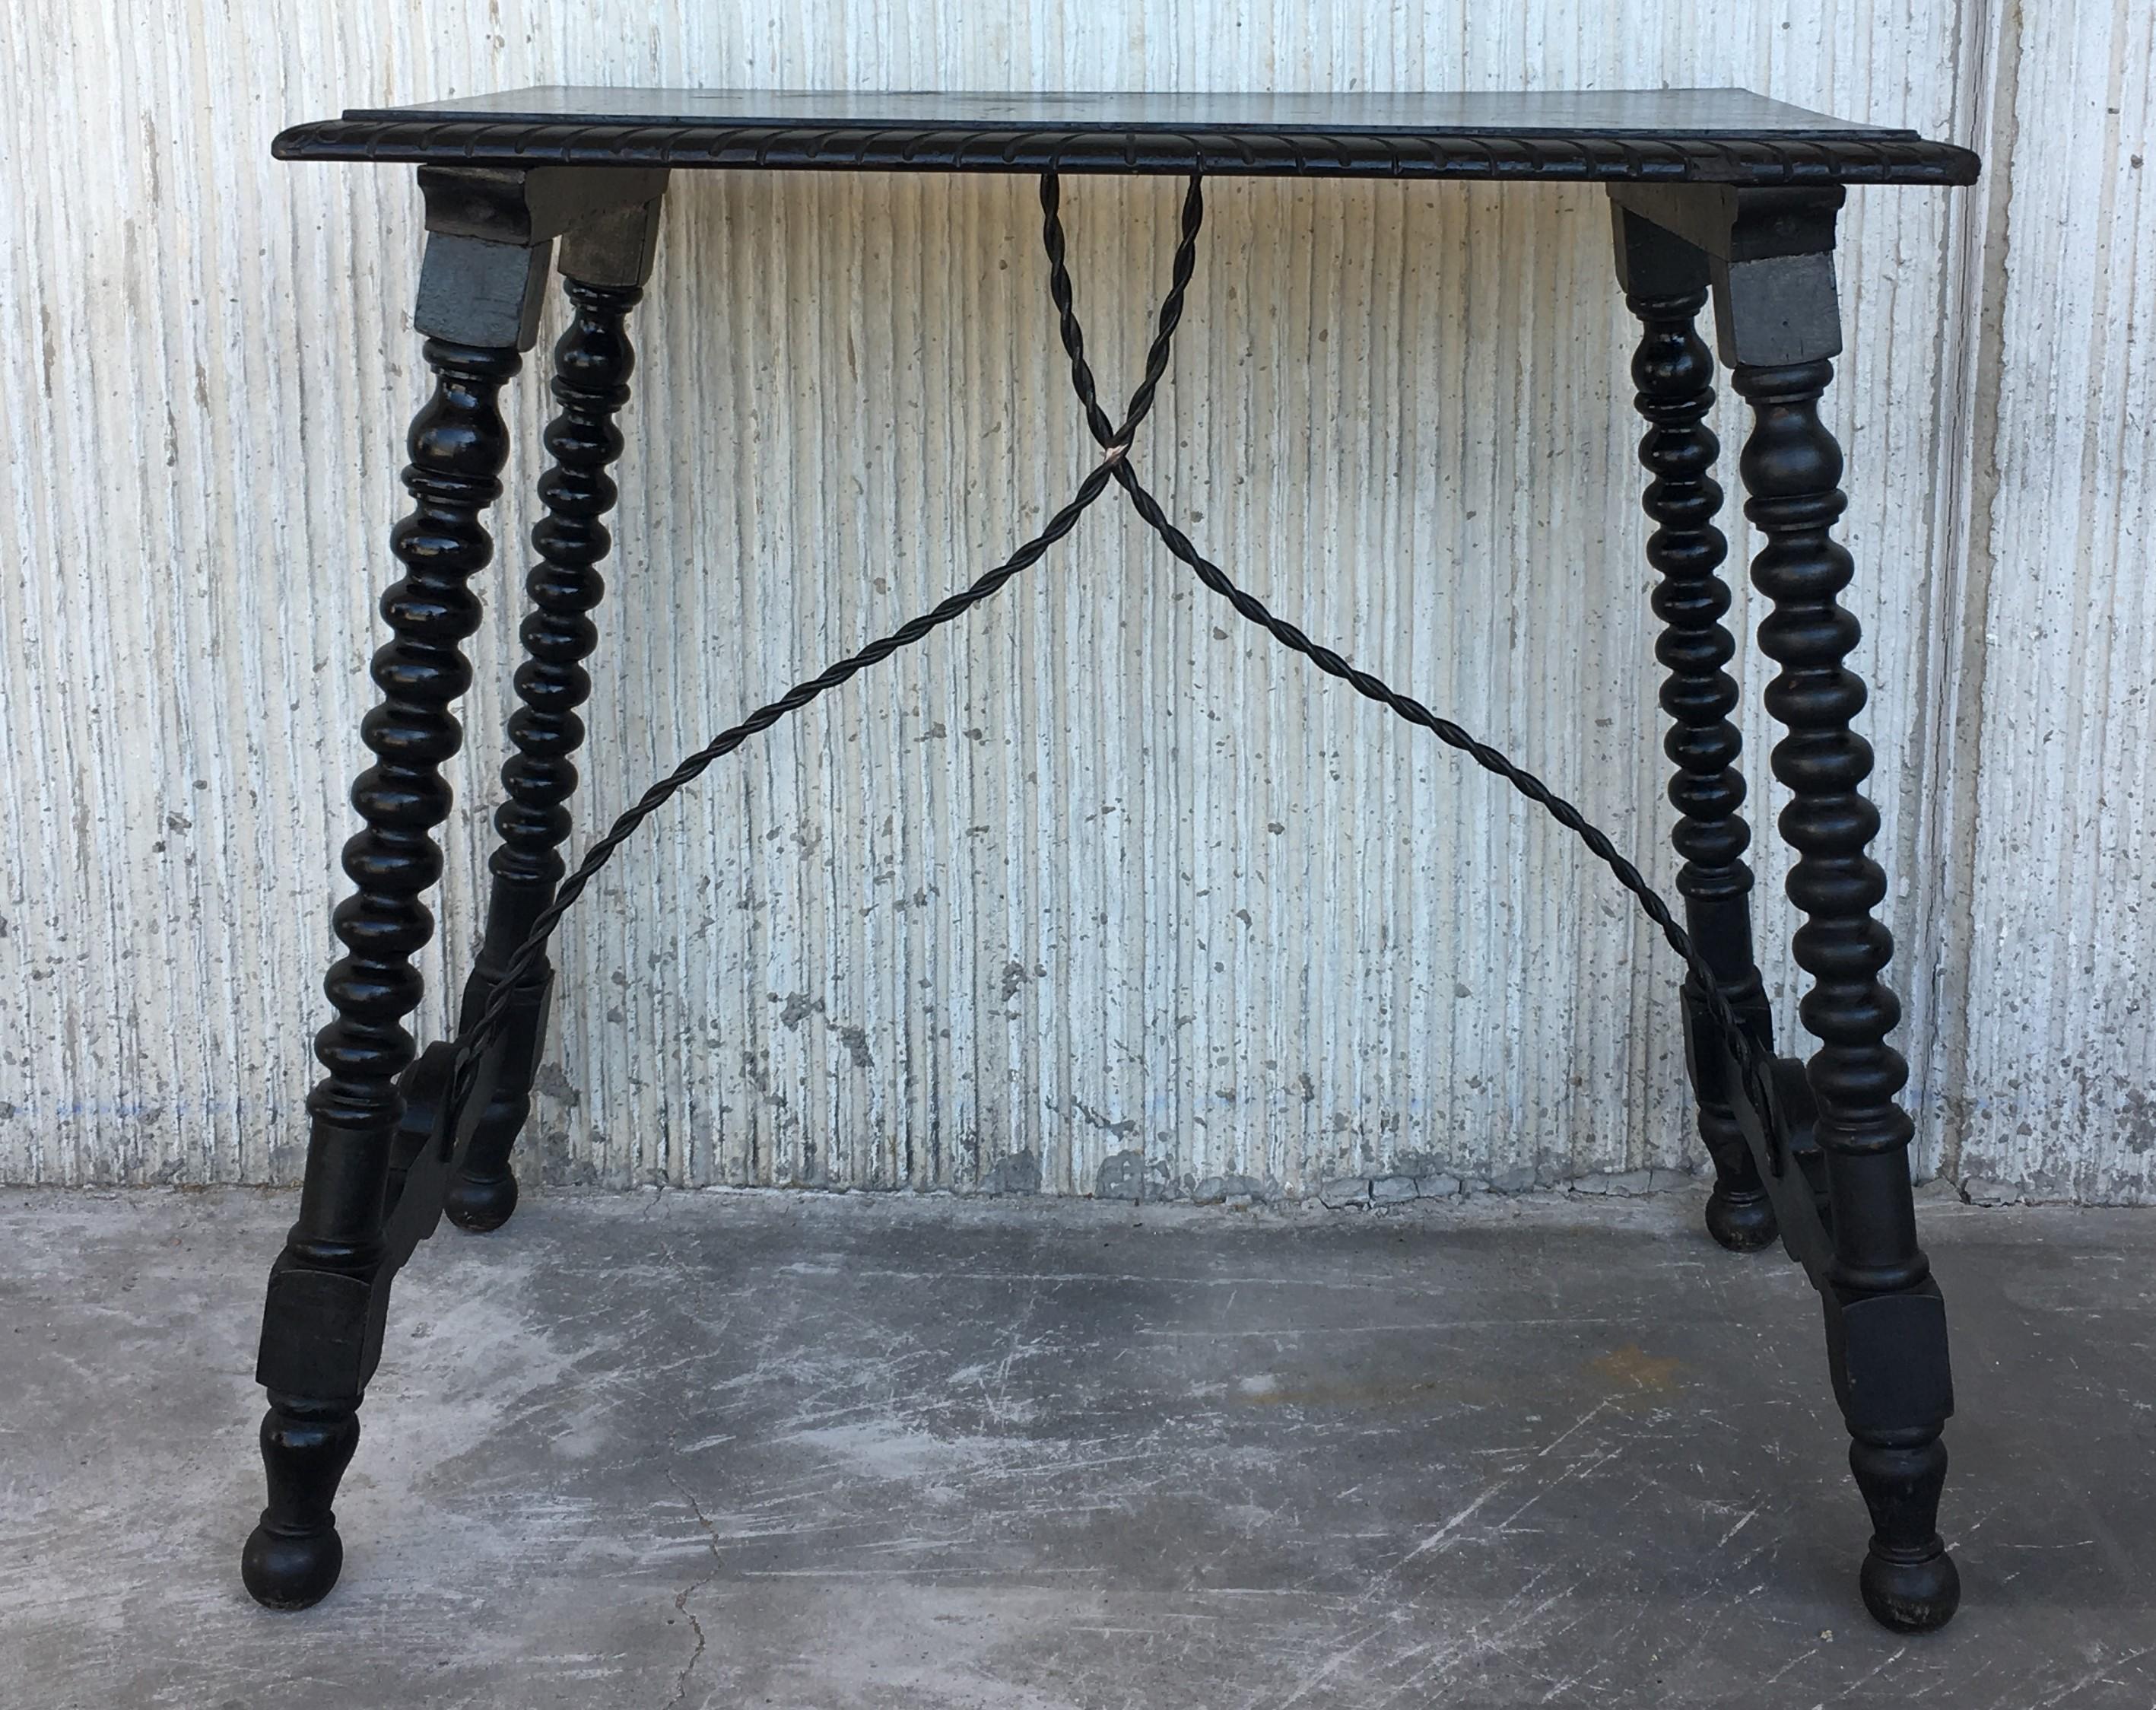 19th century Spanish side table.
19th century Spanish trestle table in walnut and iron. This piece has a great scale, lovely turned legs and iron stretcher. The top is made from a single piece of wood. This table could be used as an end table,